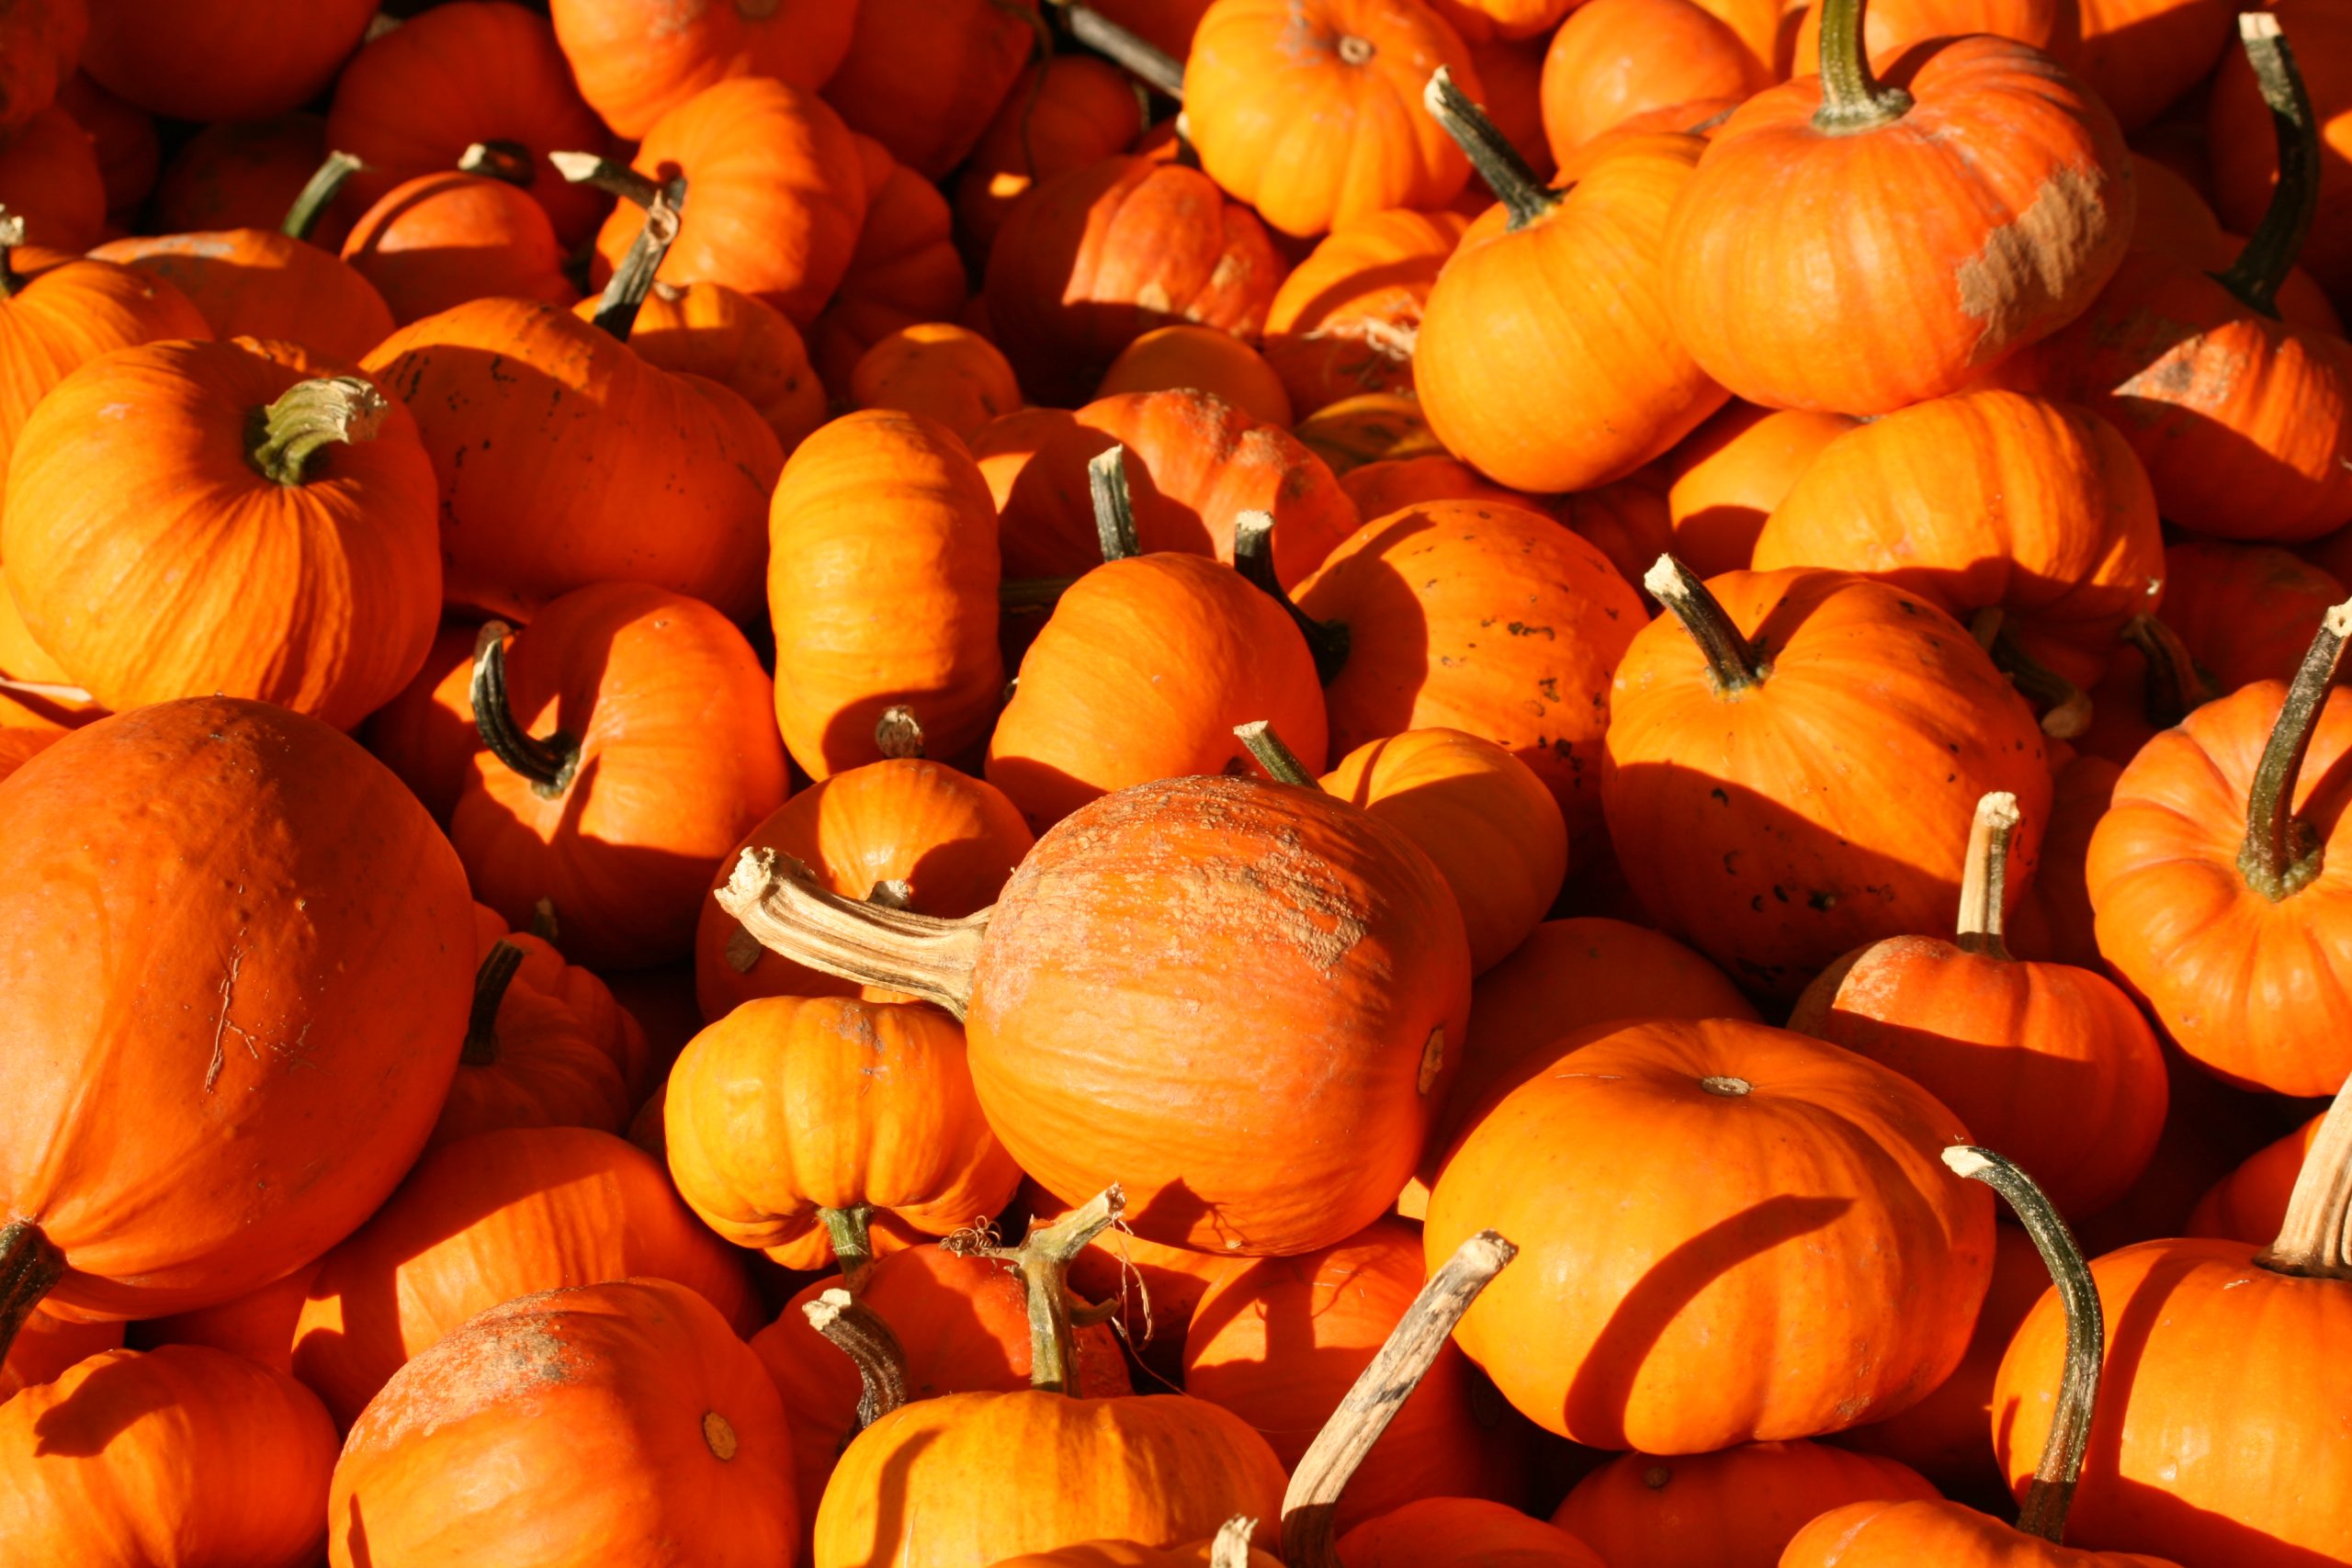 Barrel Of Pumpkins (user submitted)